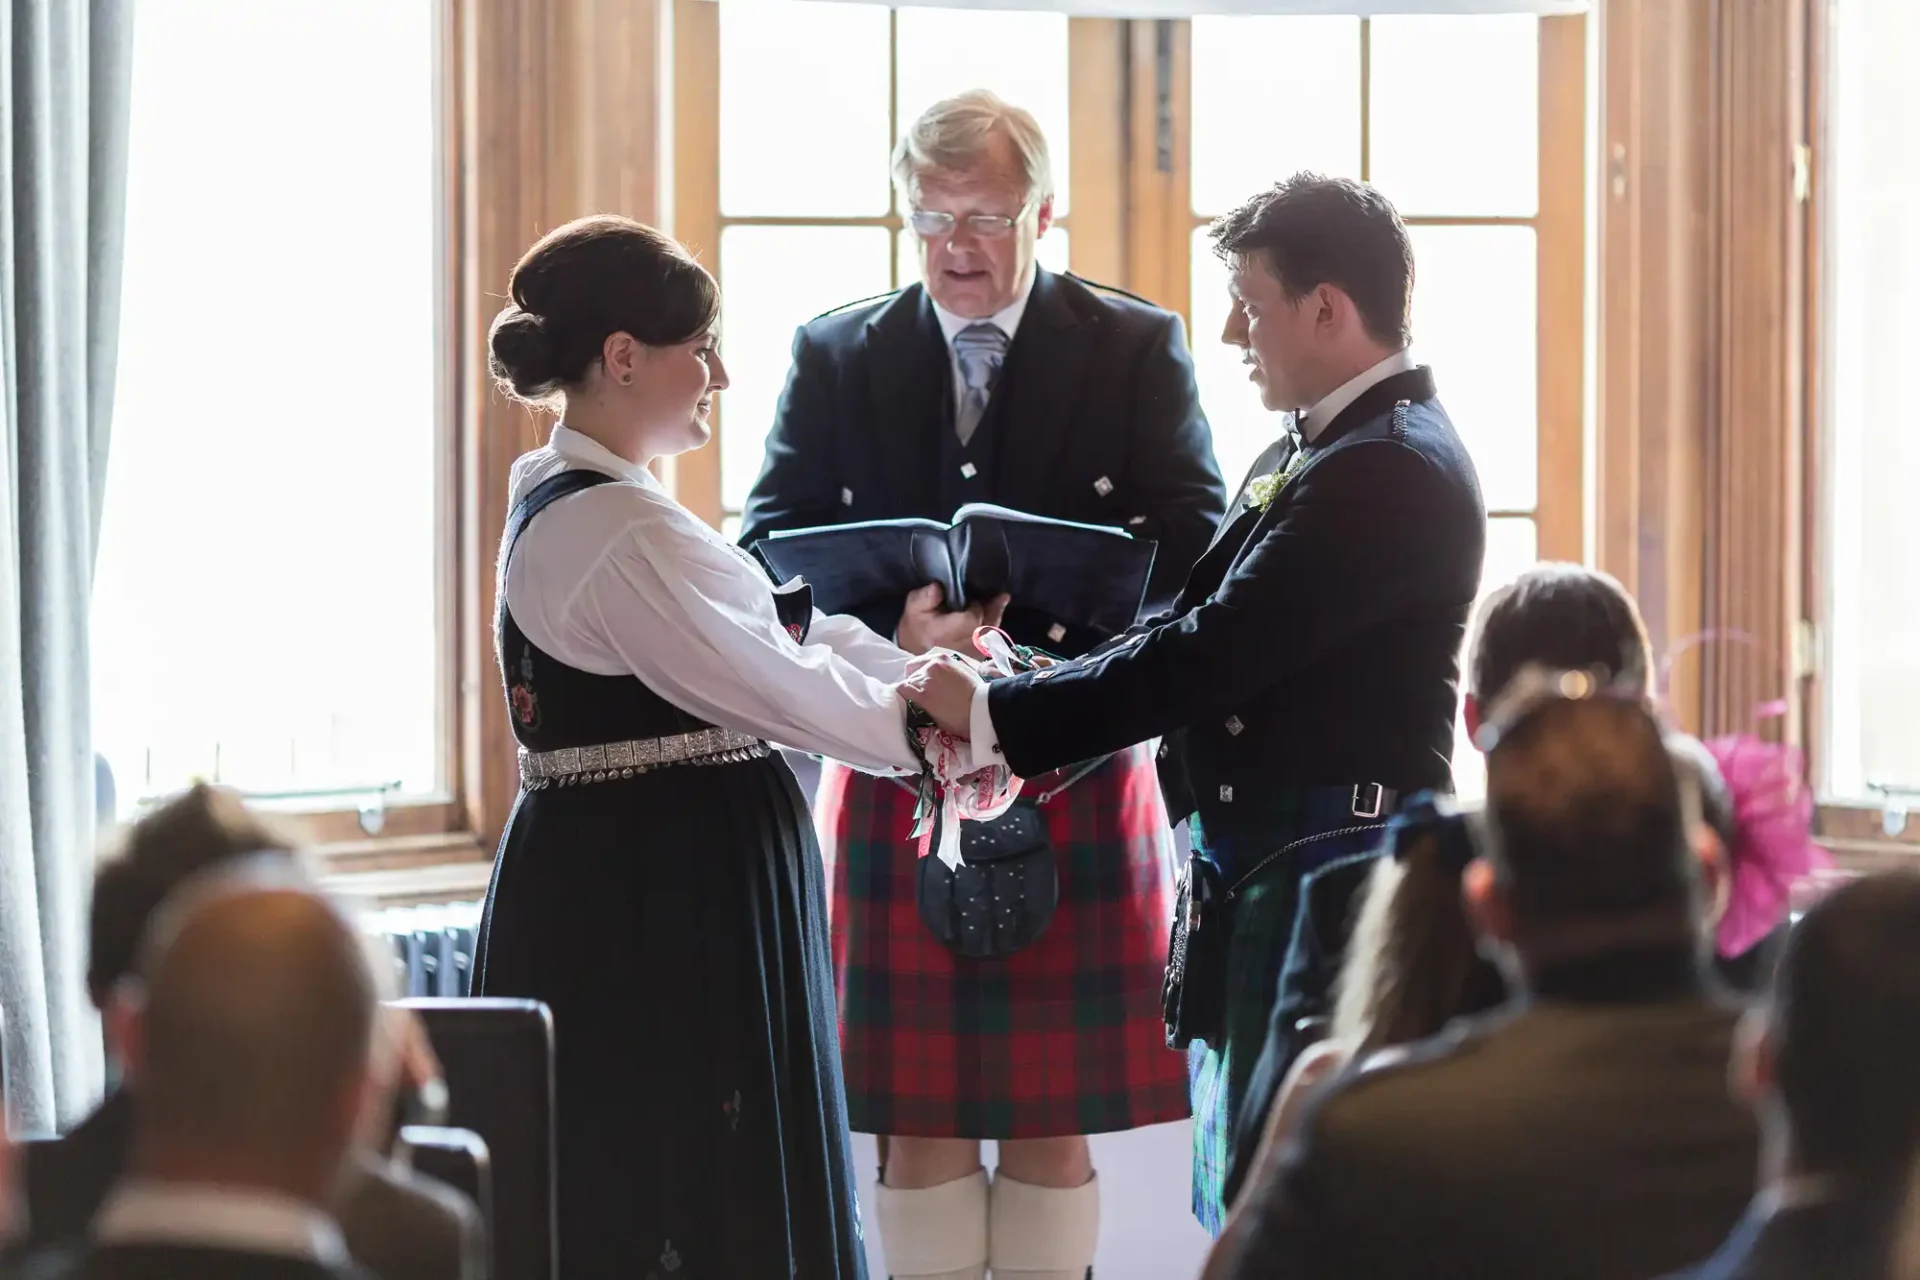 A wedding ceremony inside a room with a couple dressed in traditional scottish attire, exchanging vows while holding hands, with an officiant and guests in the background.